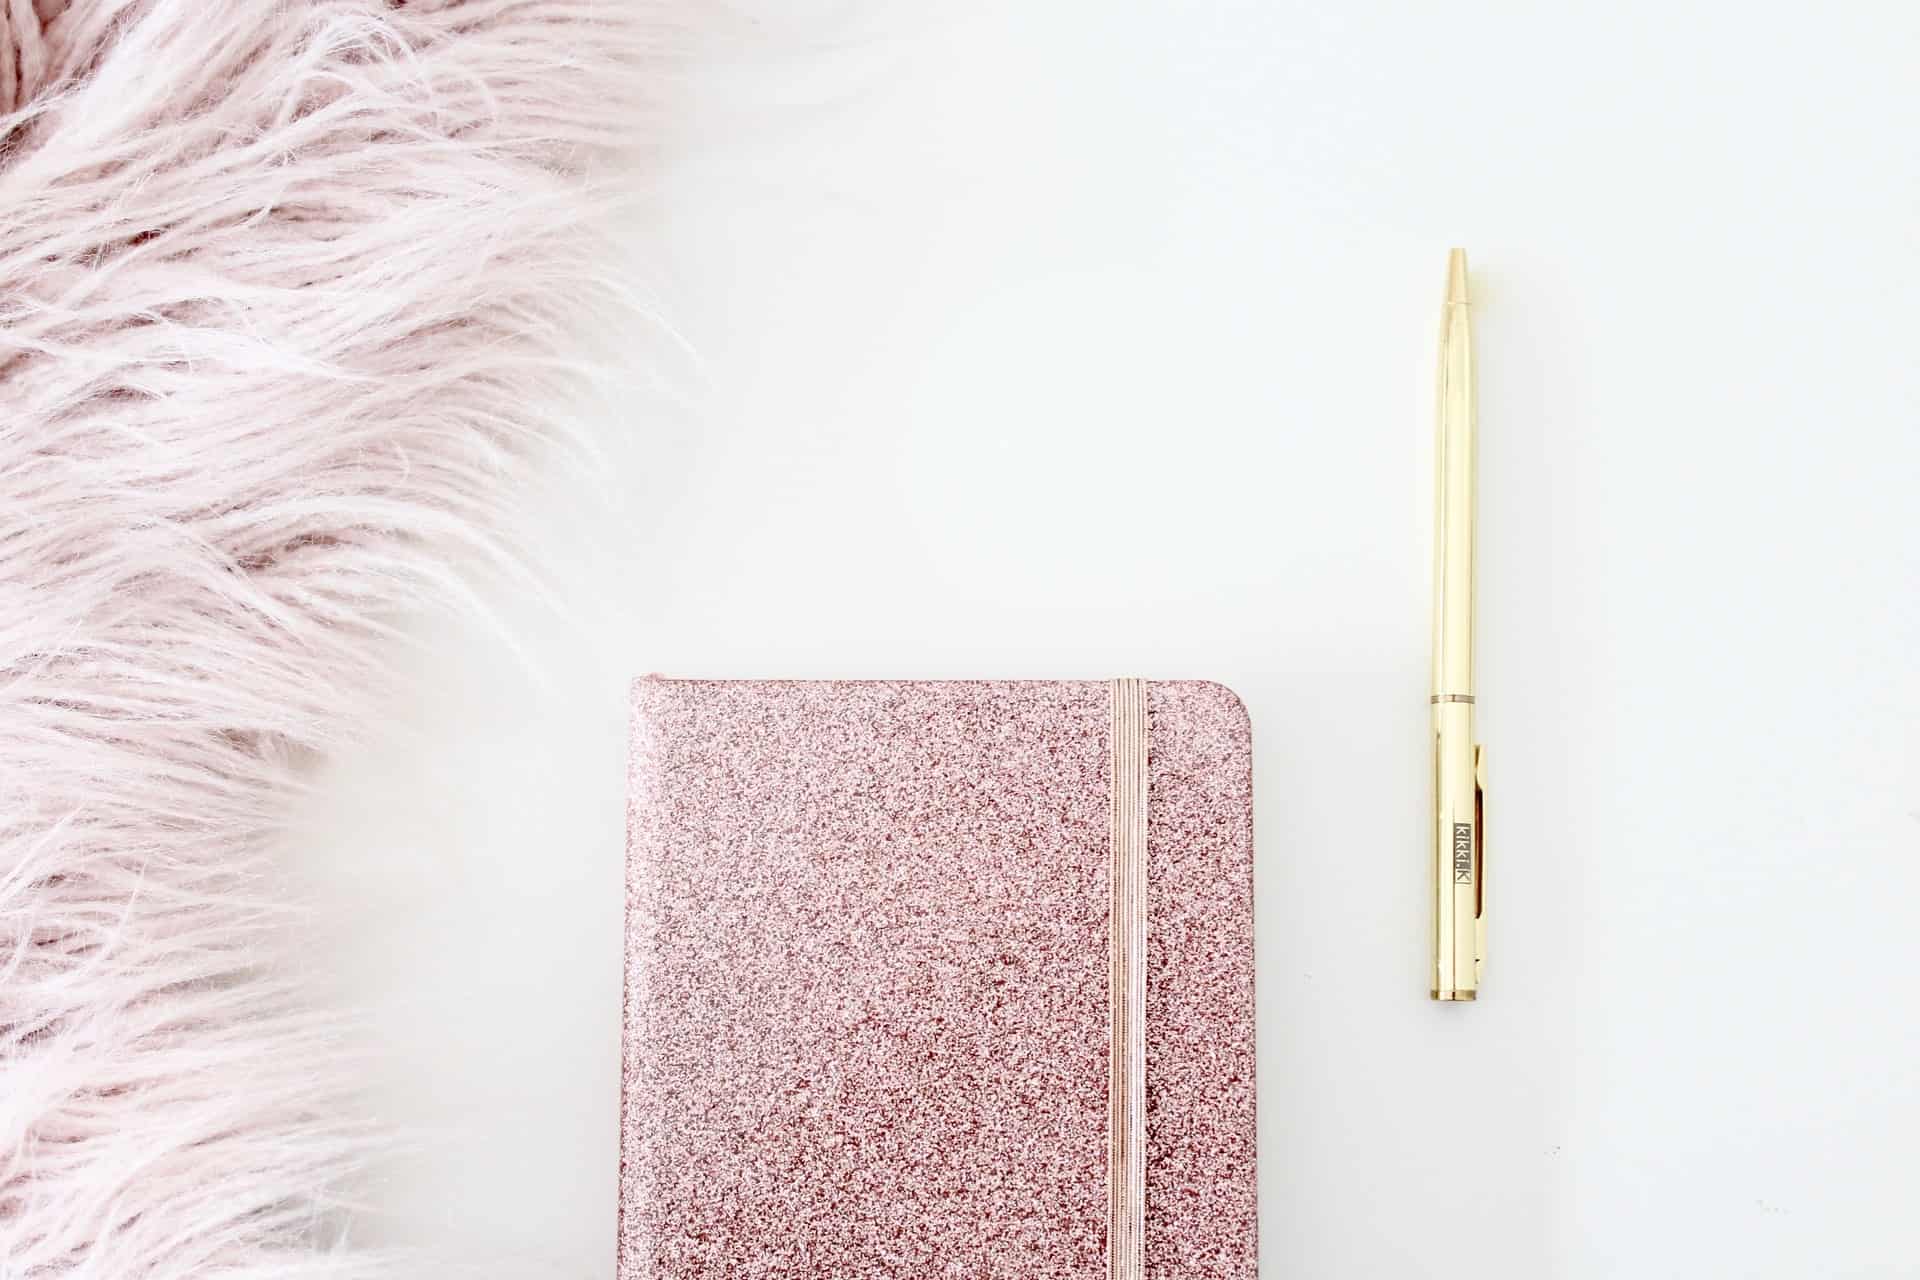 pink fur and sparking journal notebook with a golden pen